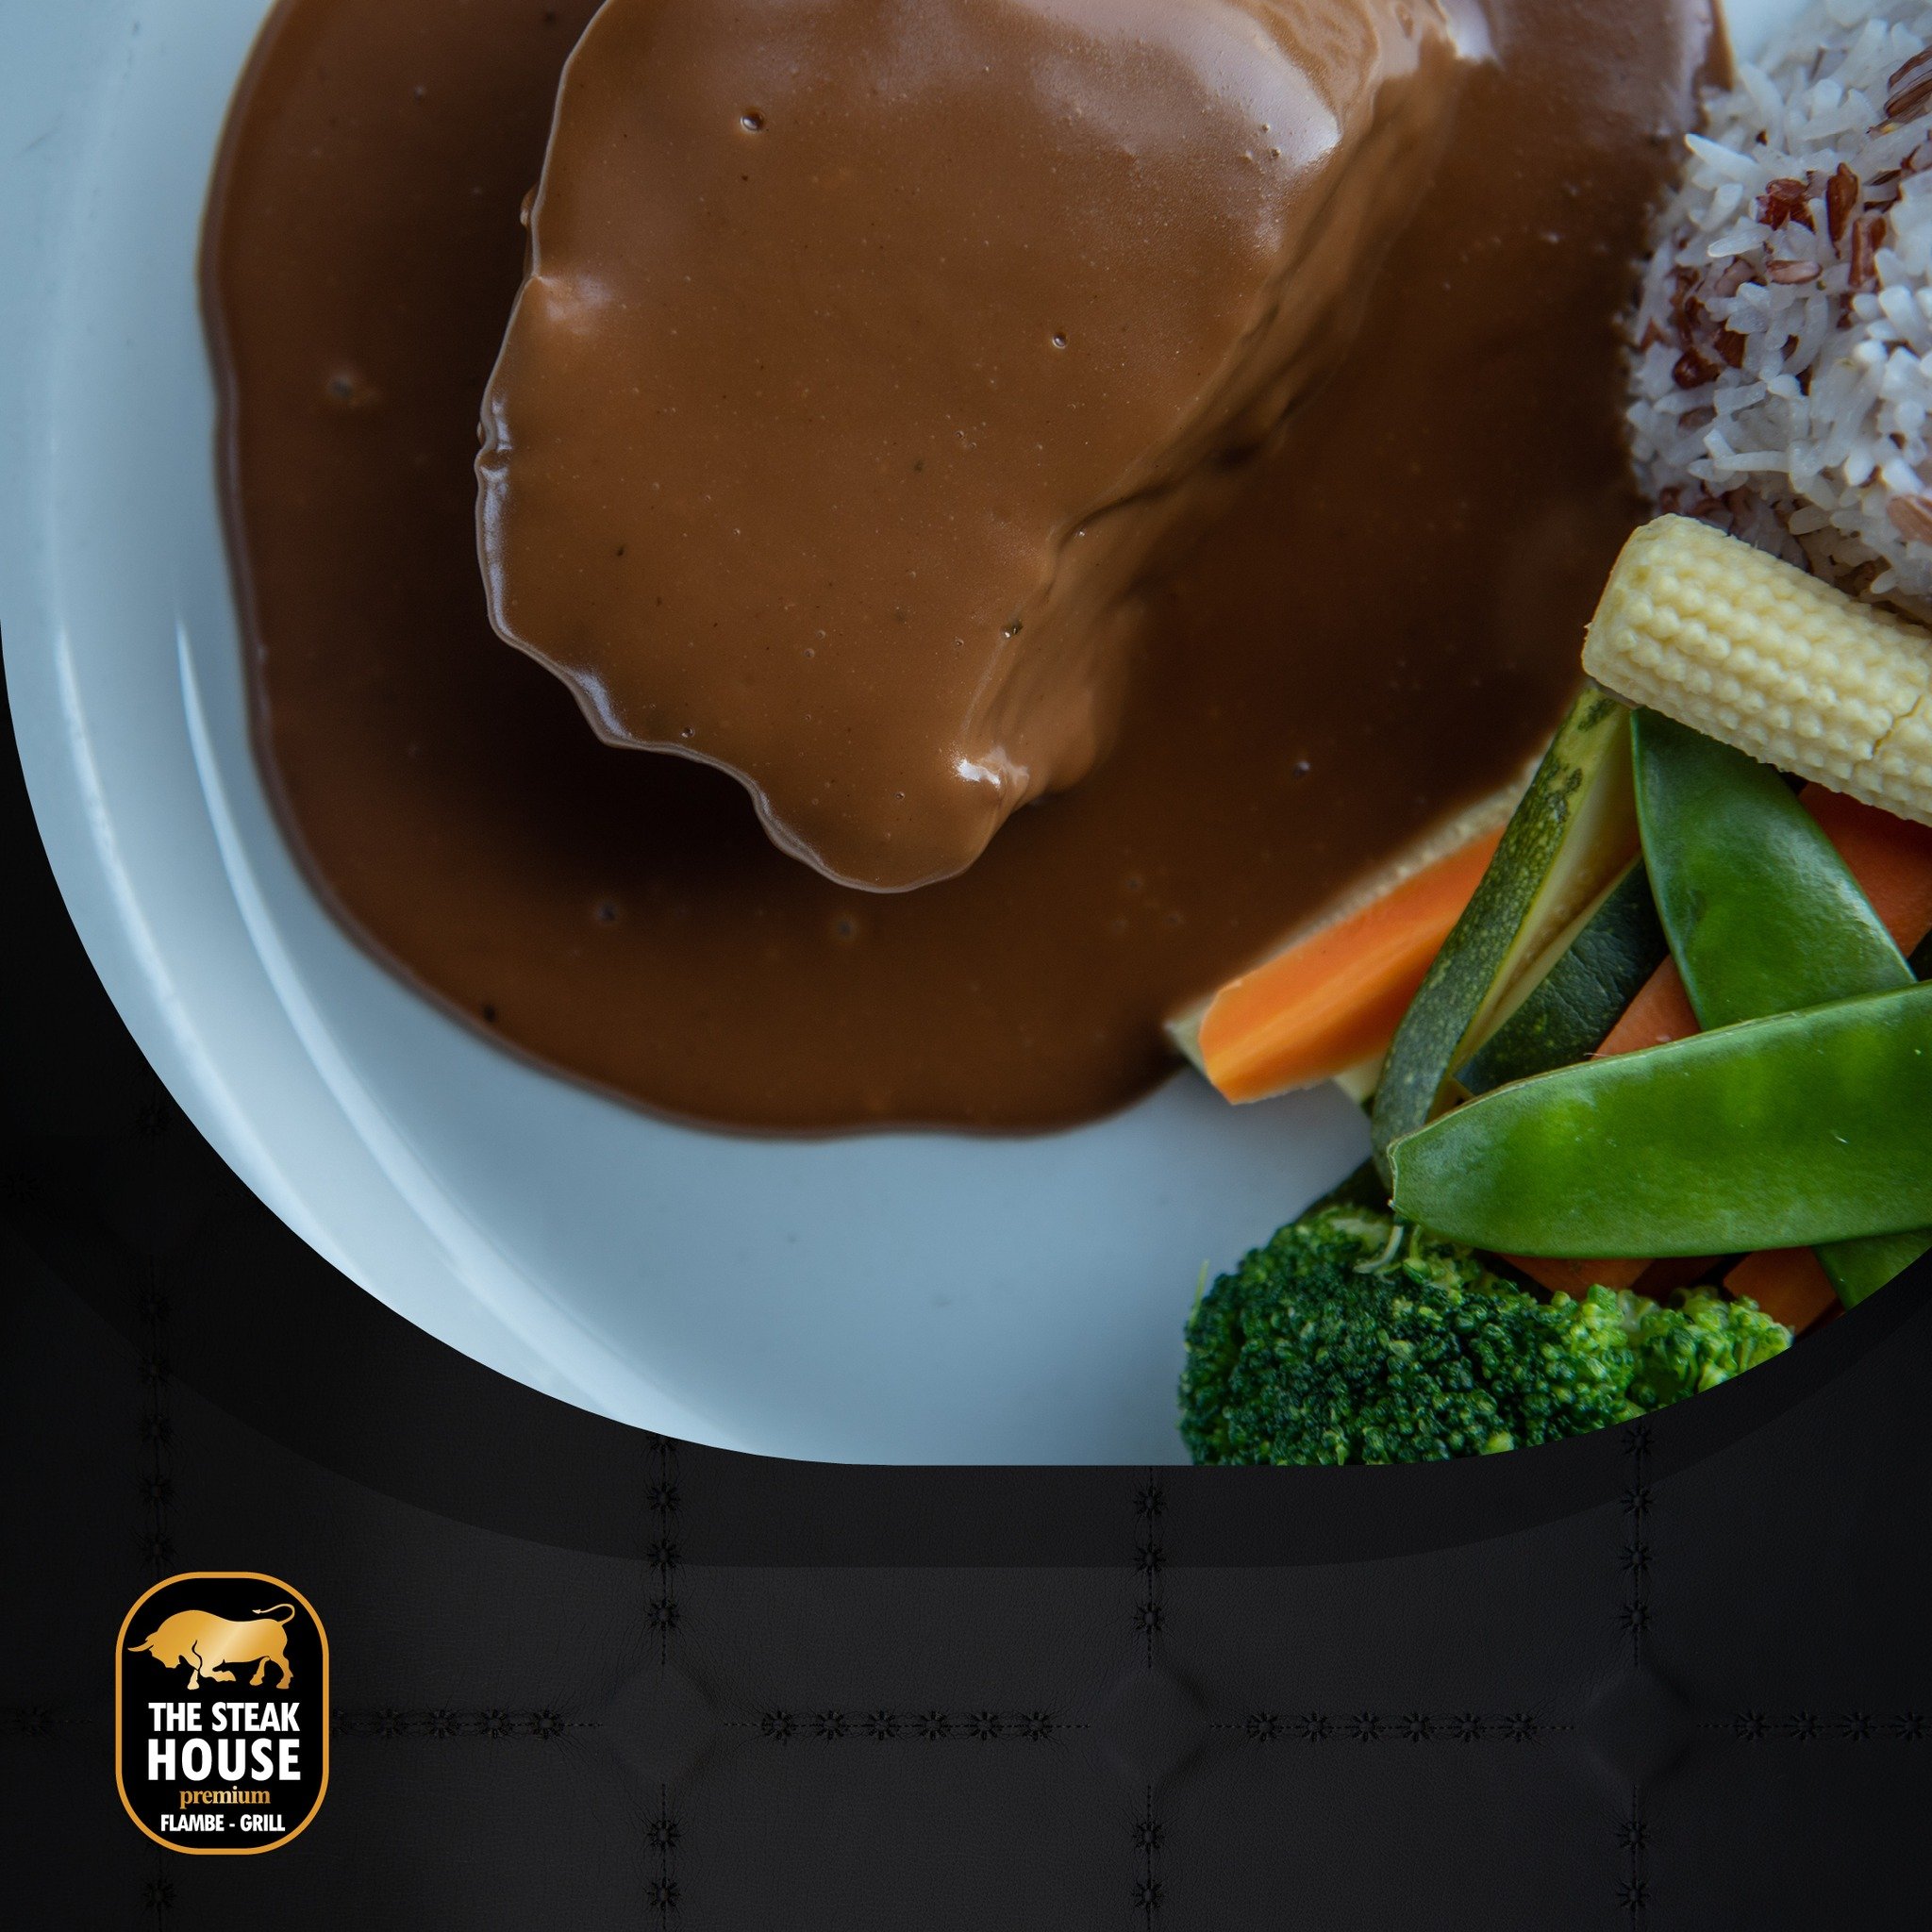 Tender fillet steak topped with classic Tennessee sauce prepared with honey, balsamic vinegar, Southern Comfort whisky liquor and fresh cream, served with steamed veggies and your choice of side dish.

Probably the best Steaks in town!

-15% On Deliv